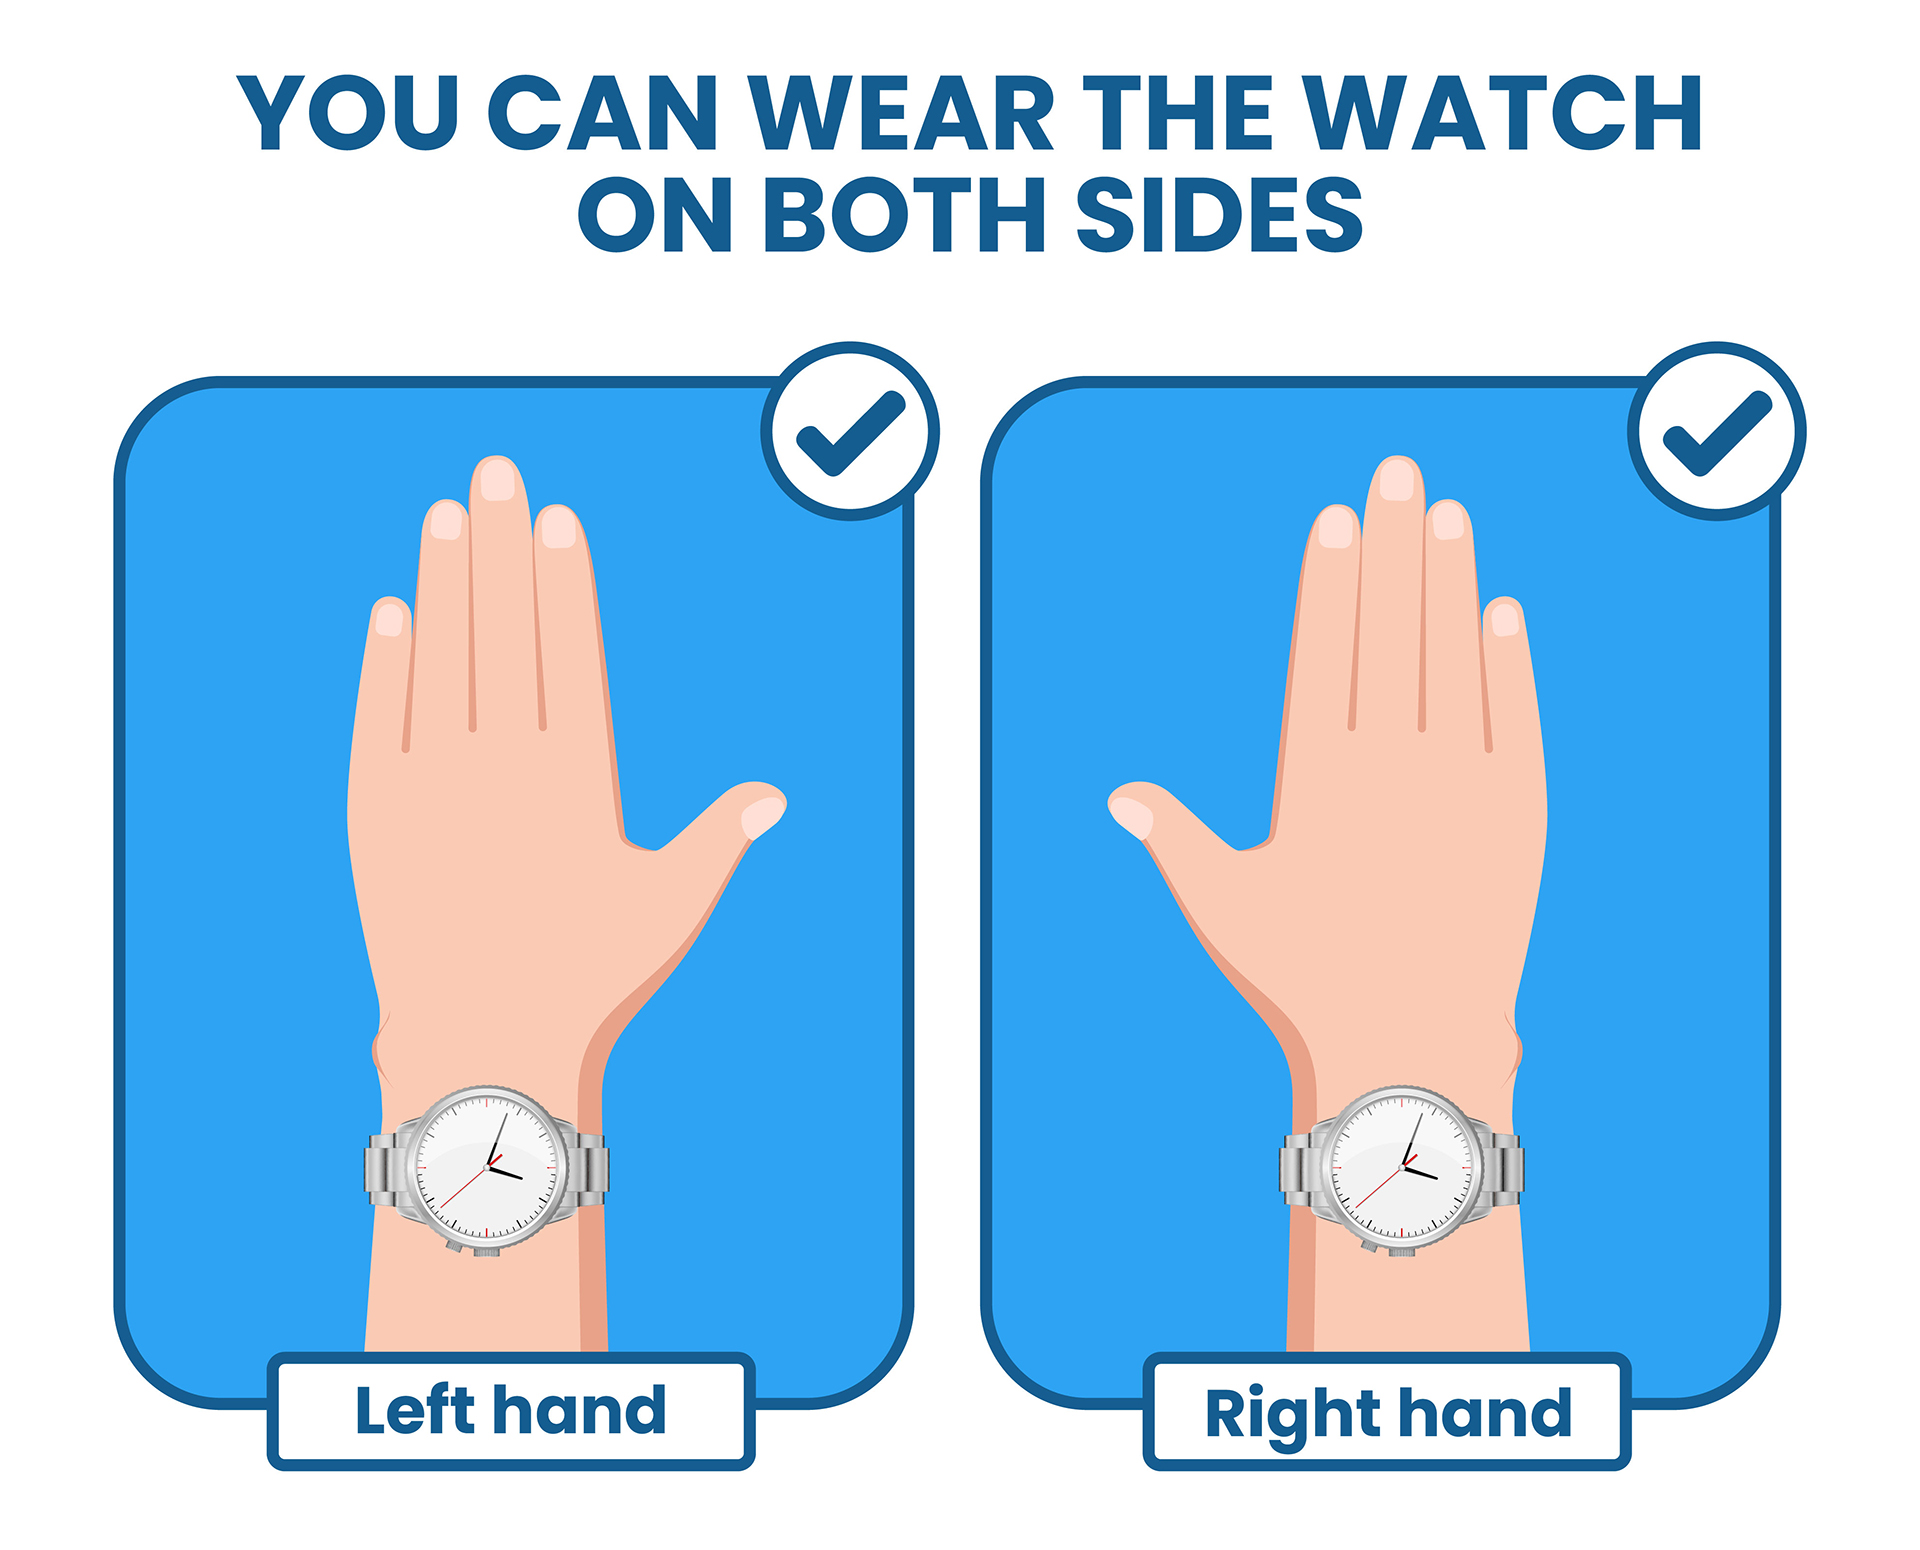 you can wear the watch on both hands/sides